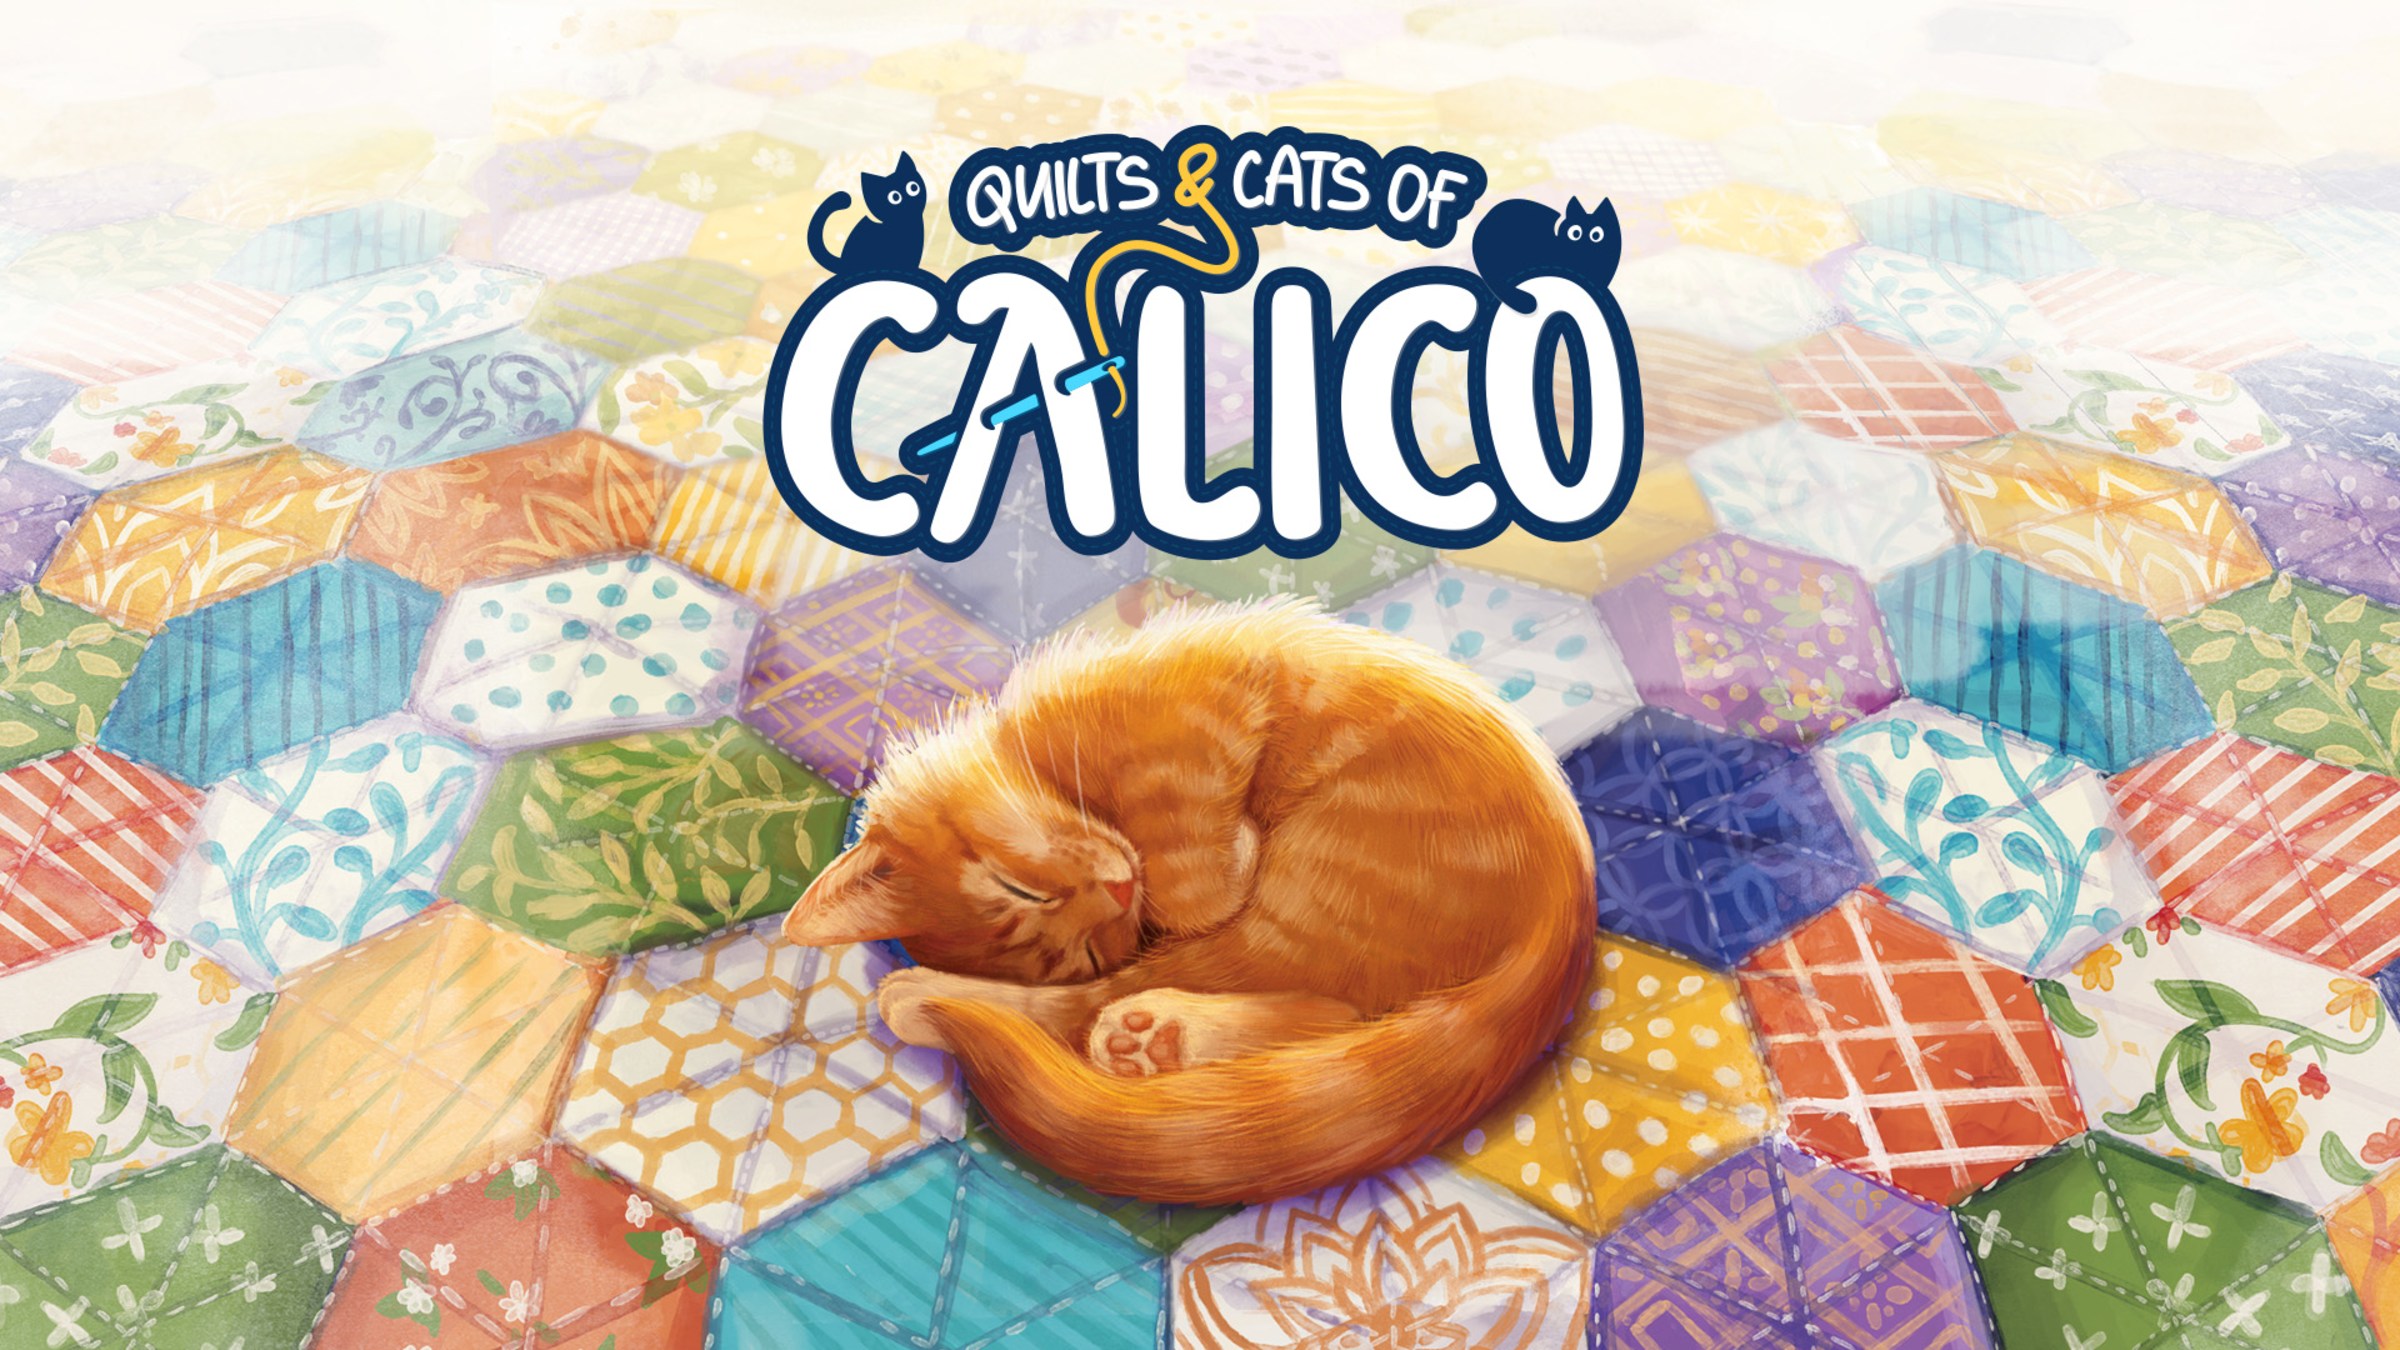 Quilts and Cats of Calico PS5 Version Full Game Setup Free Download